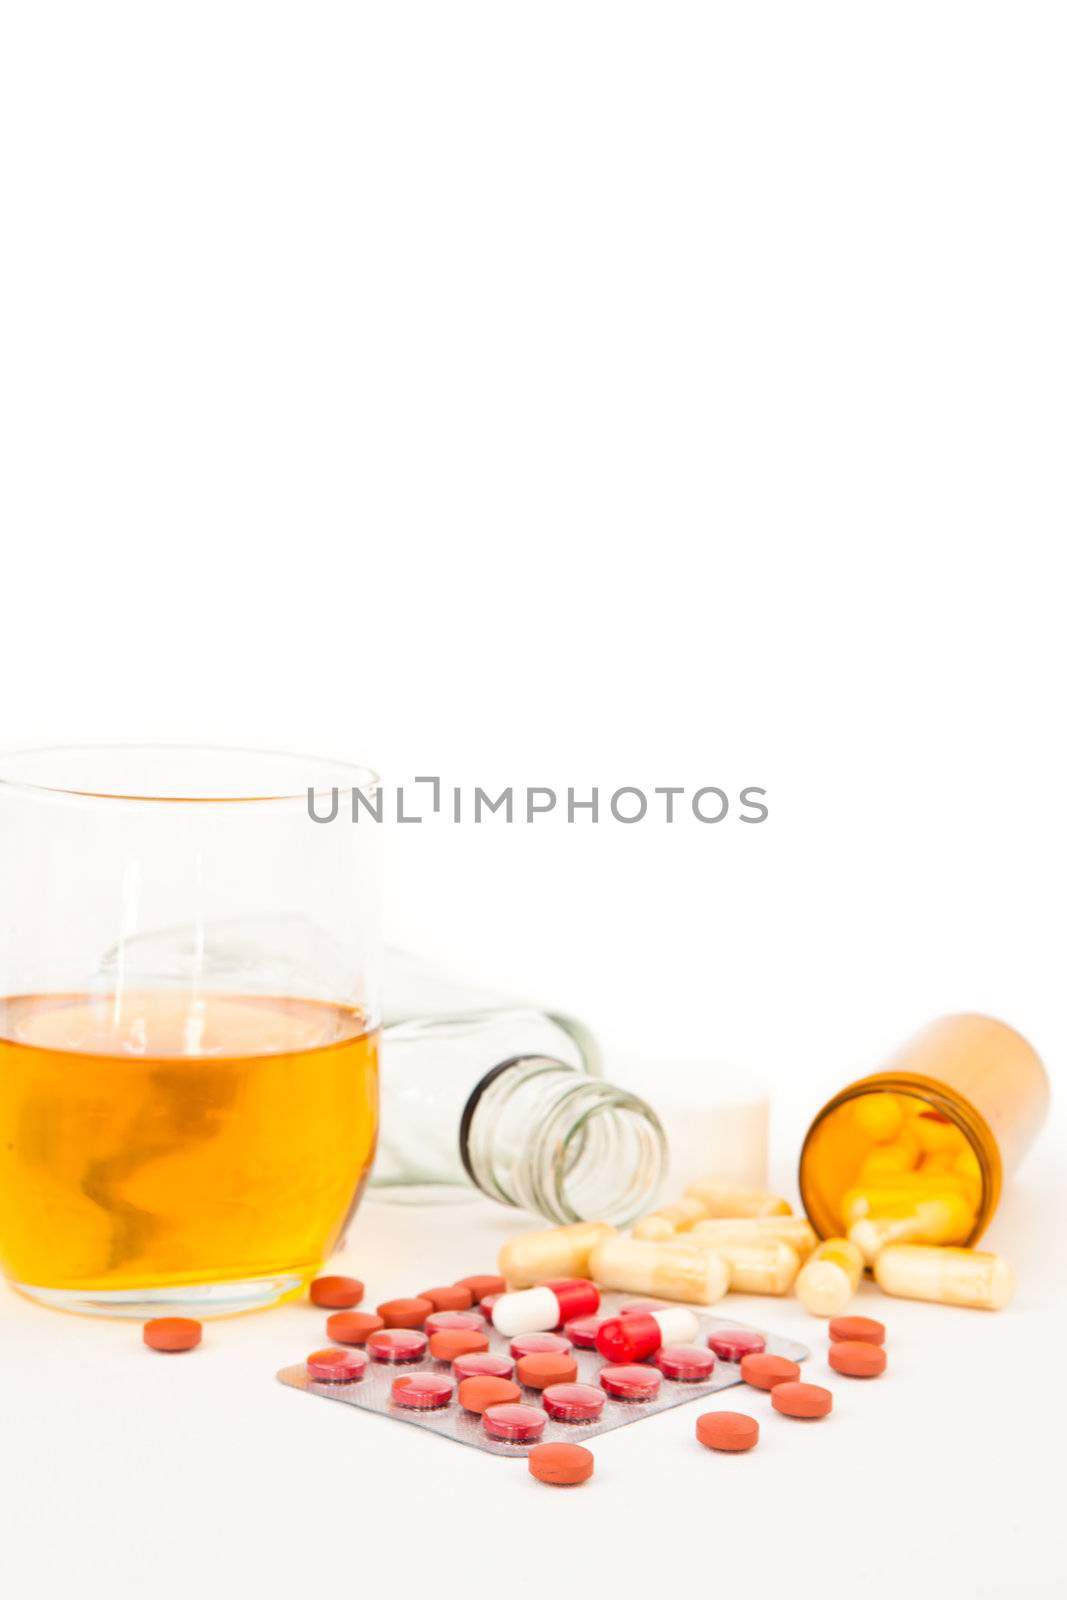 Suicide attempt with a mixture of alcohol and medications by Wavebreakmedia